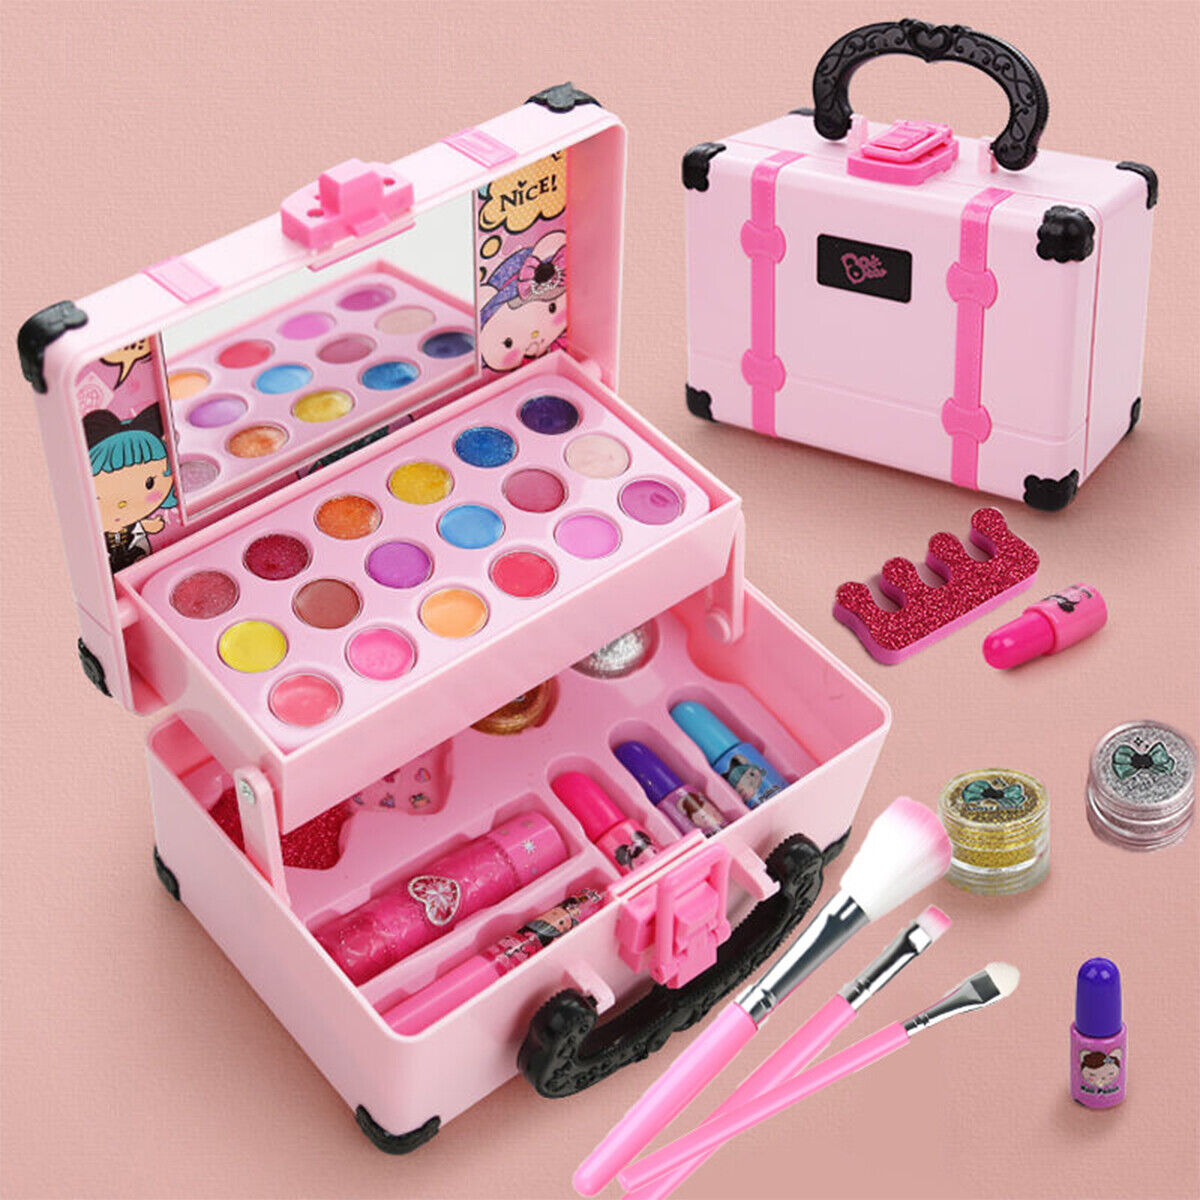 Kids Makeup Toy Kit Kids Makeup Beauty Toy Washable With Portable Cosmetic Box·